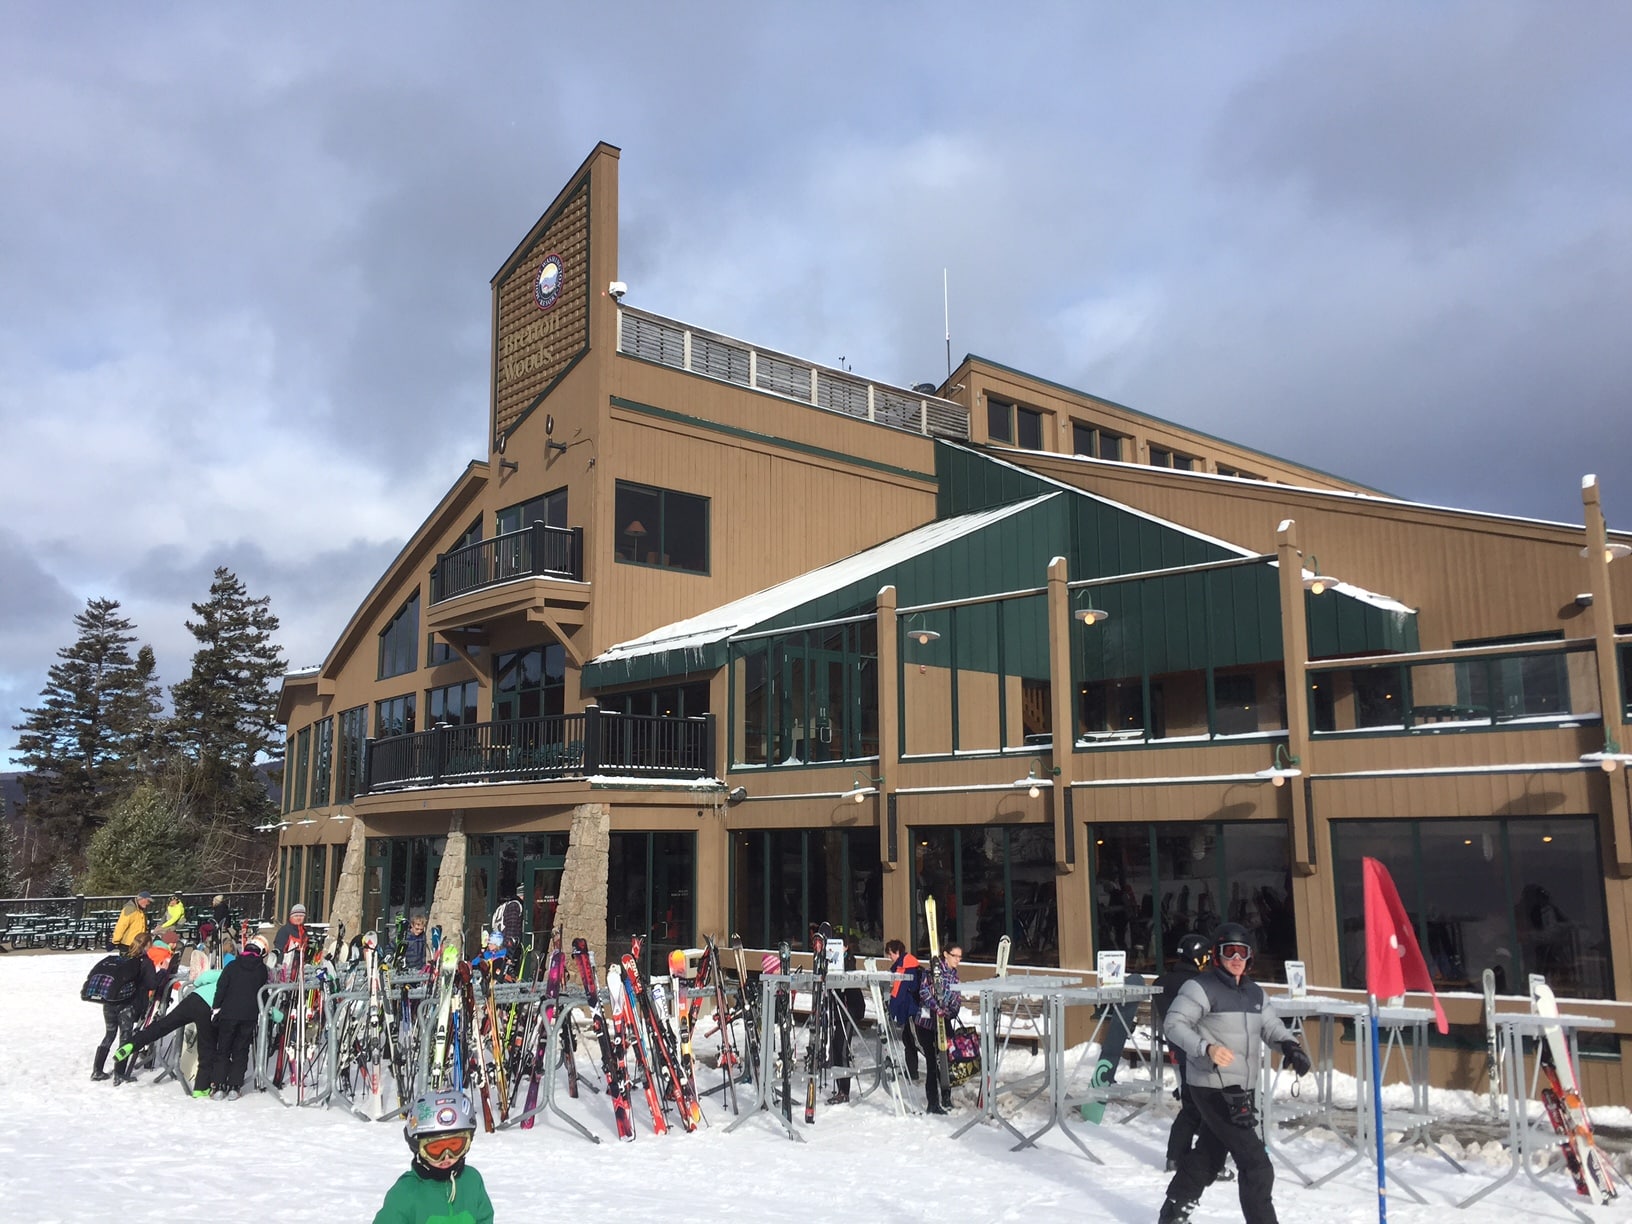 A Day at Bretton Woods Mountain Resort